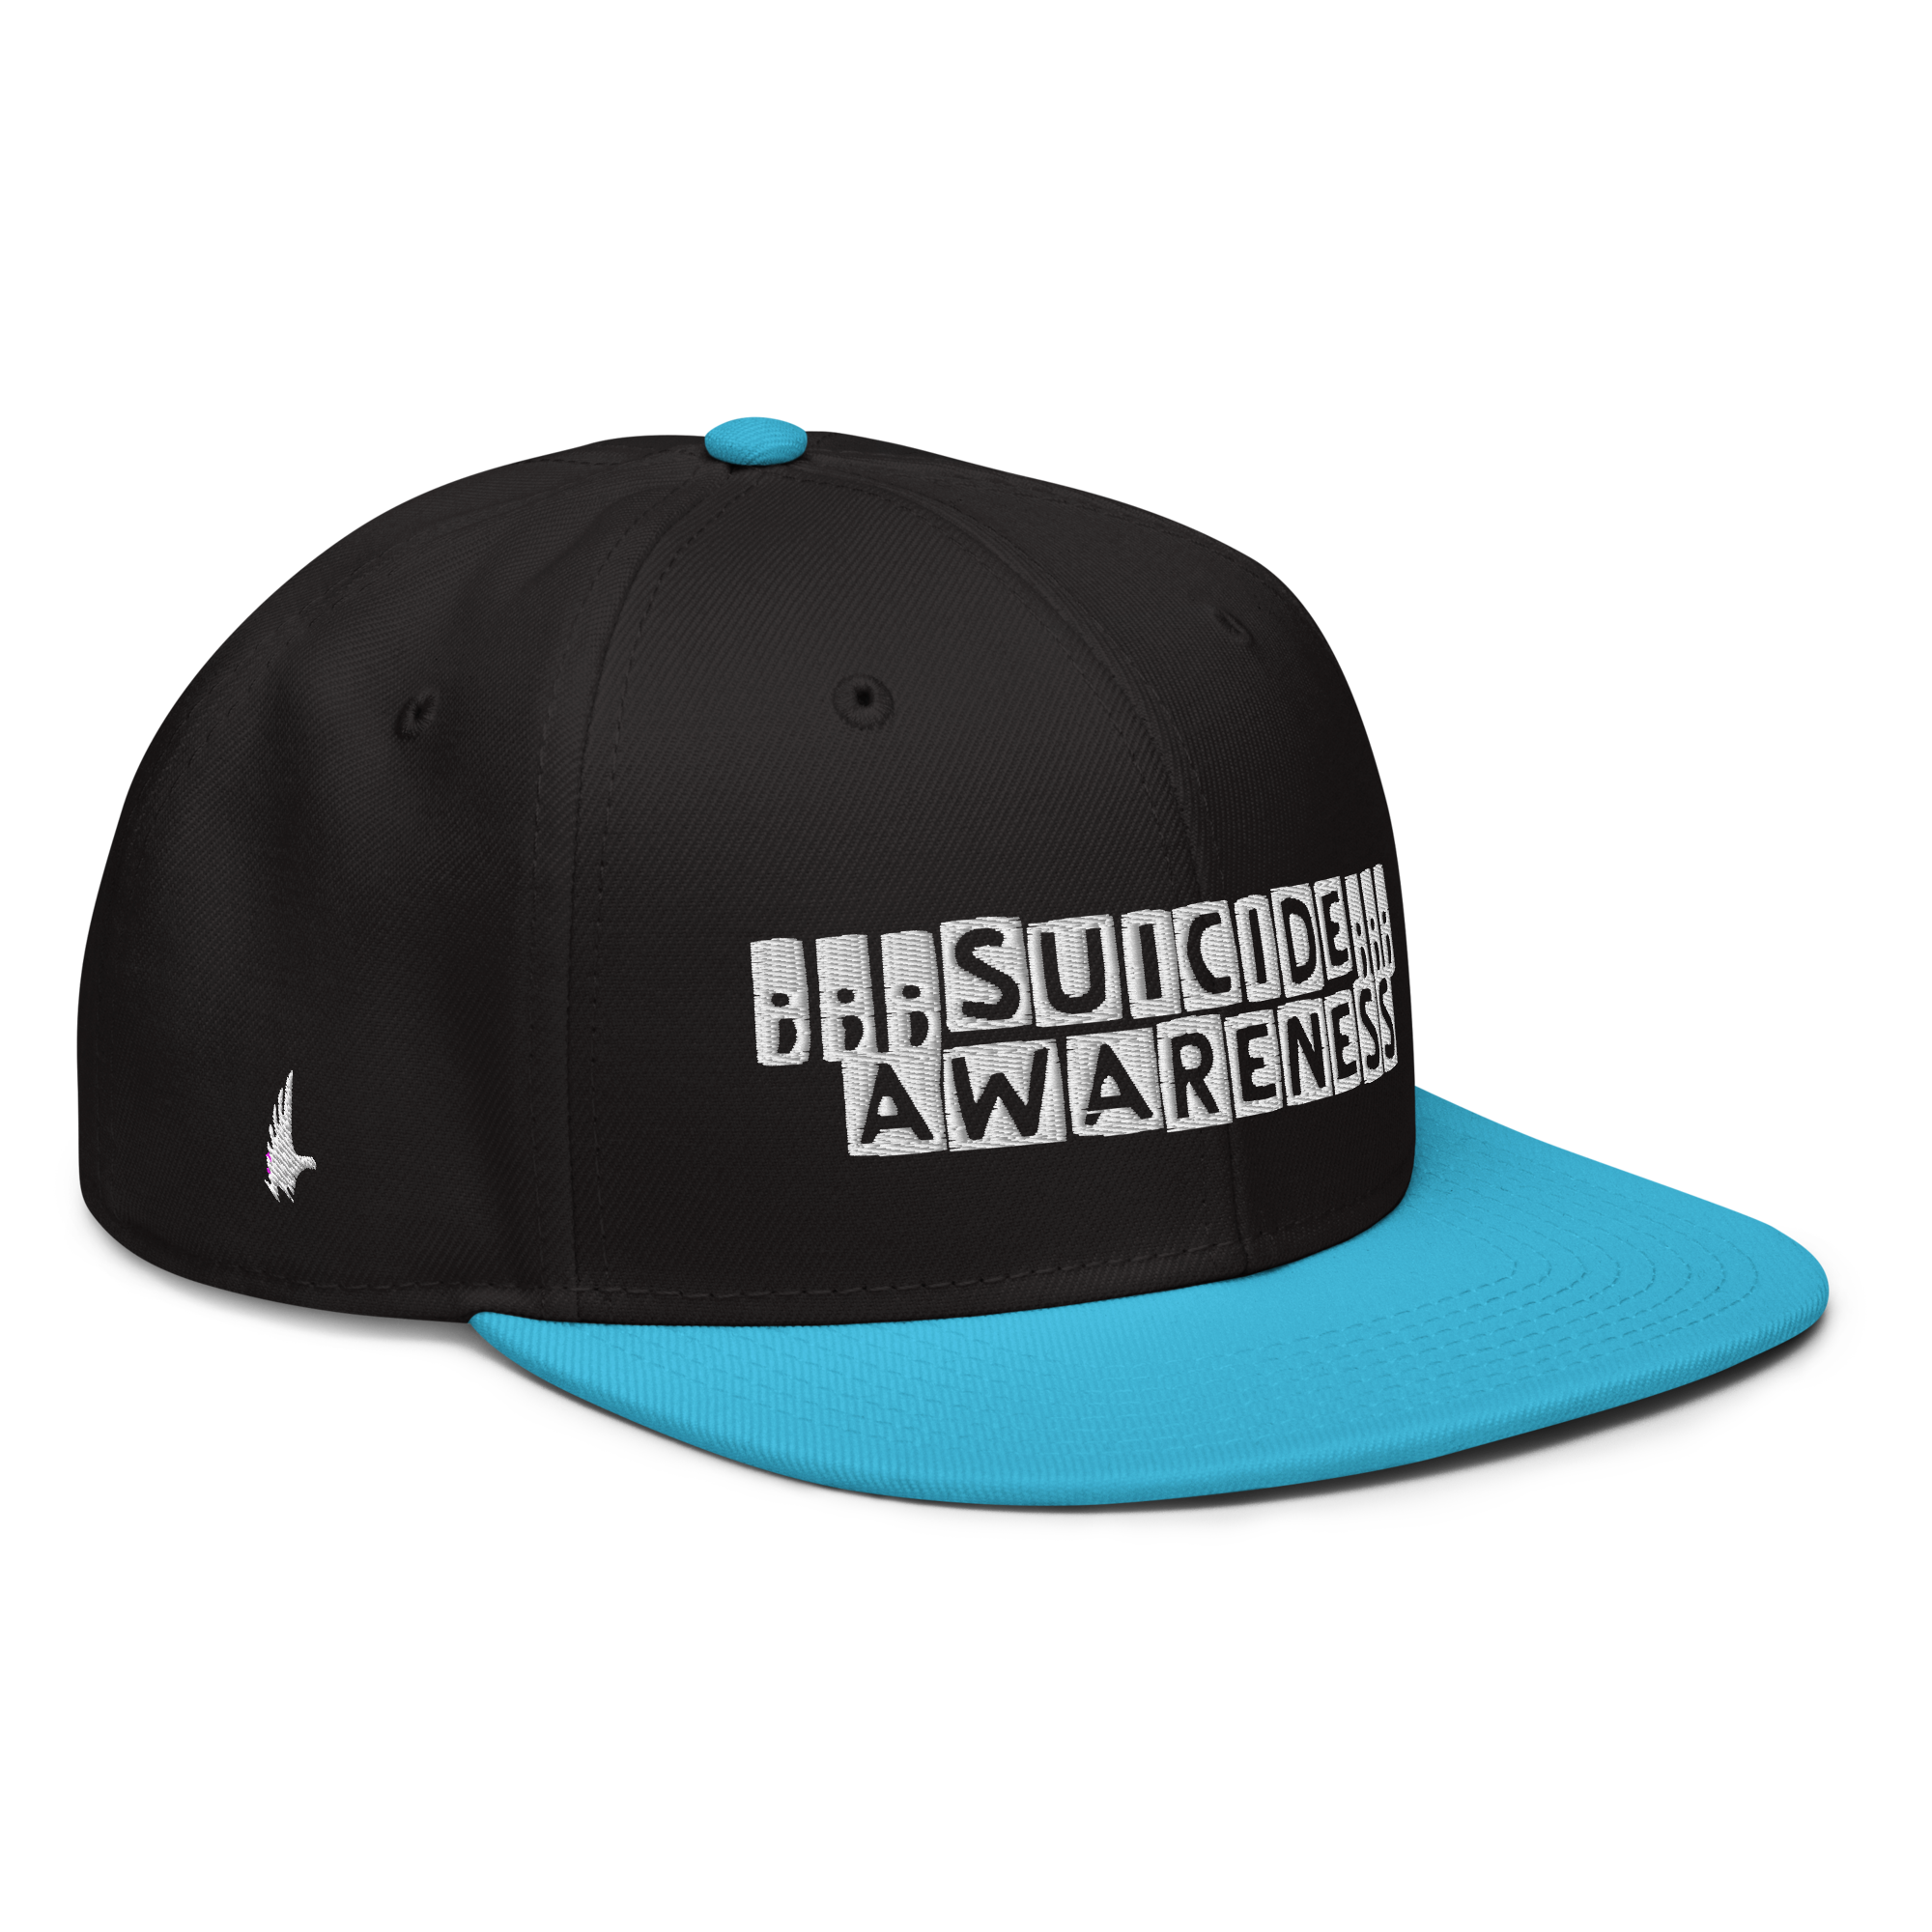 Suicide Awareness Snapback Hat - Black / White / Blue OS - Loyalty Vibes